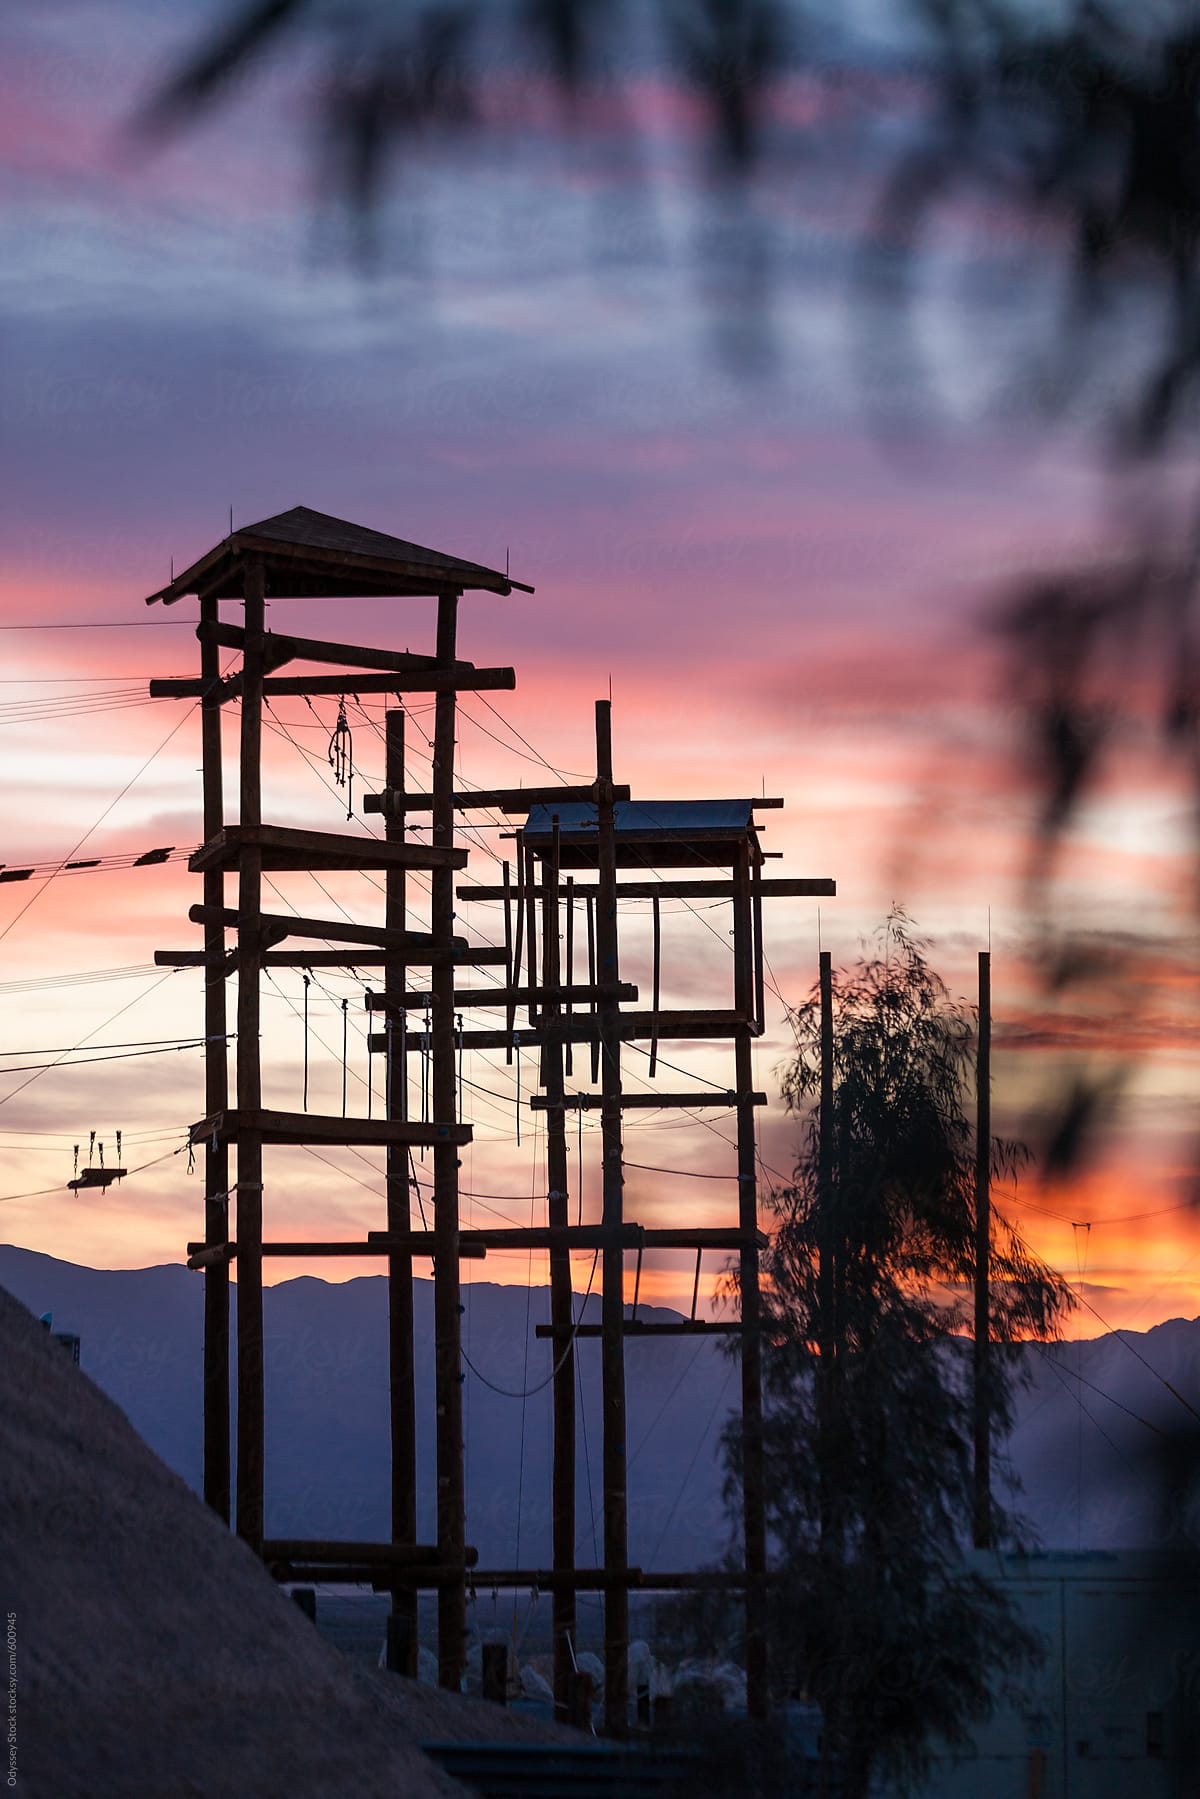 Obstacle Course Towers at Sunset